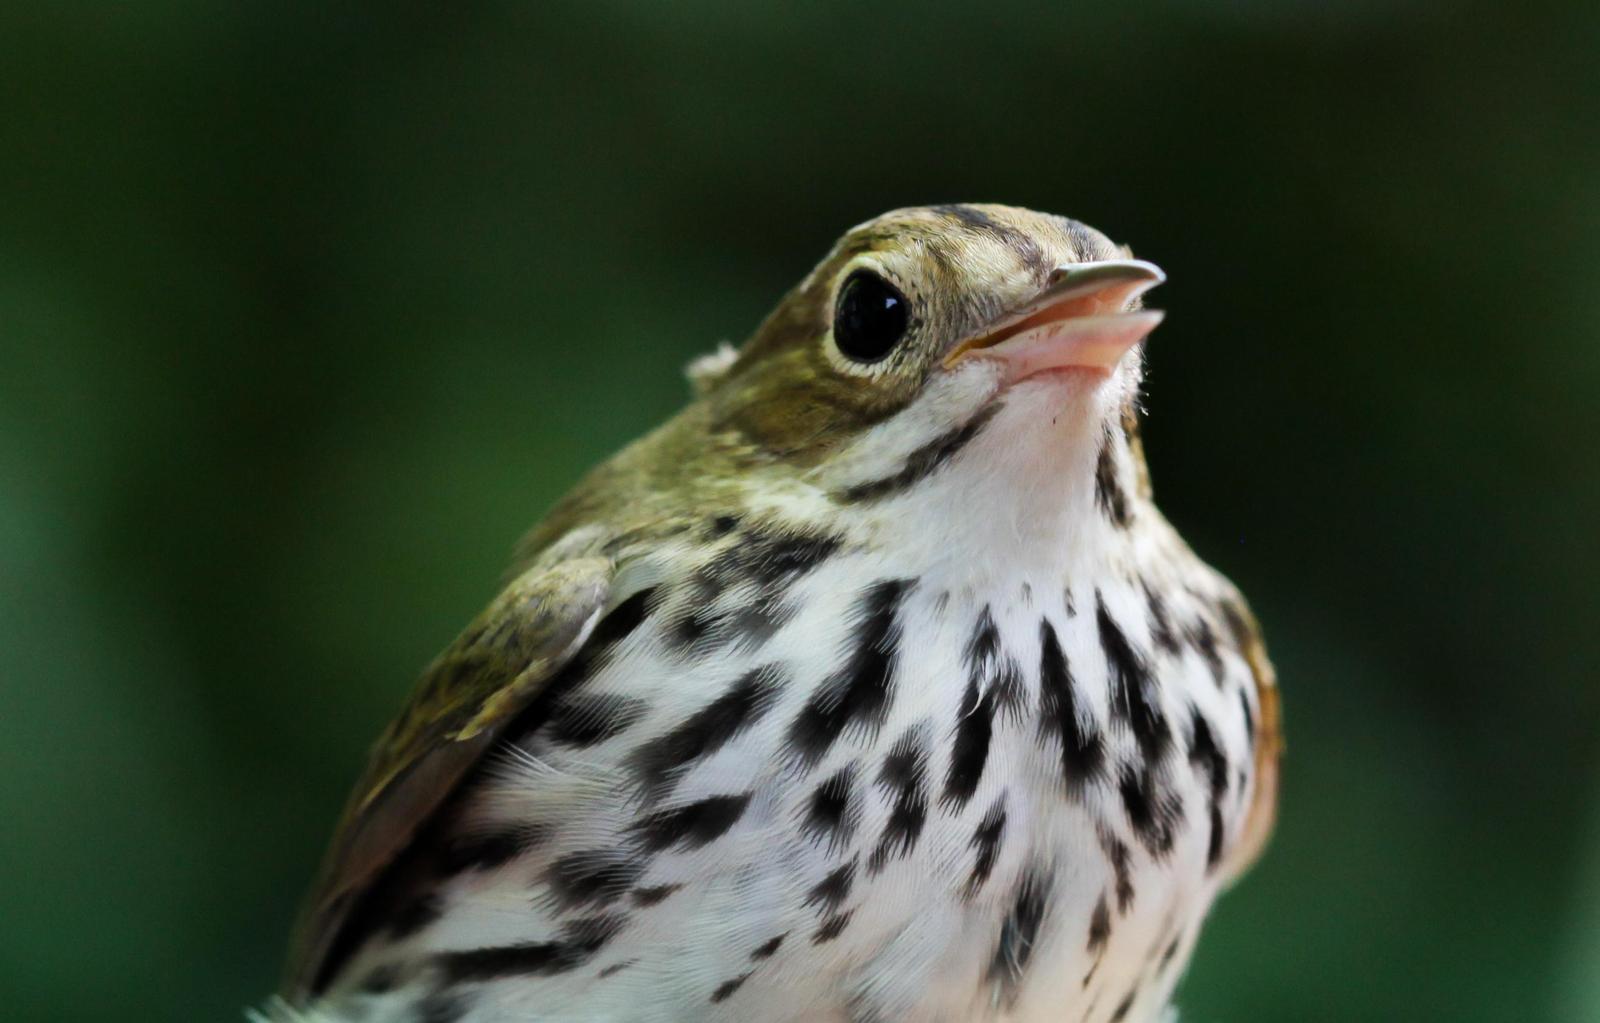 Ovenbird Photo by Lucy Wightman